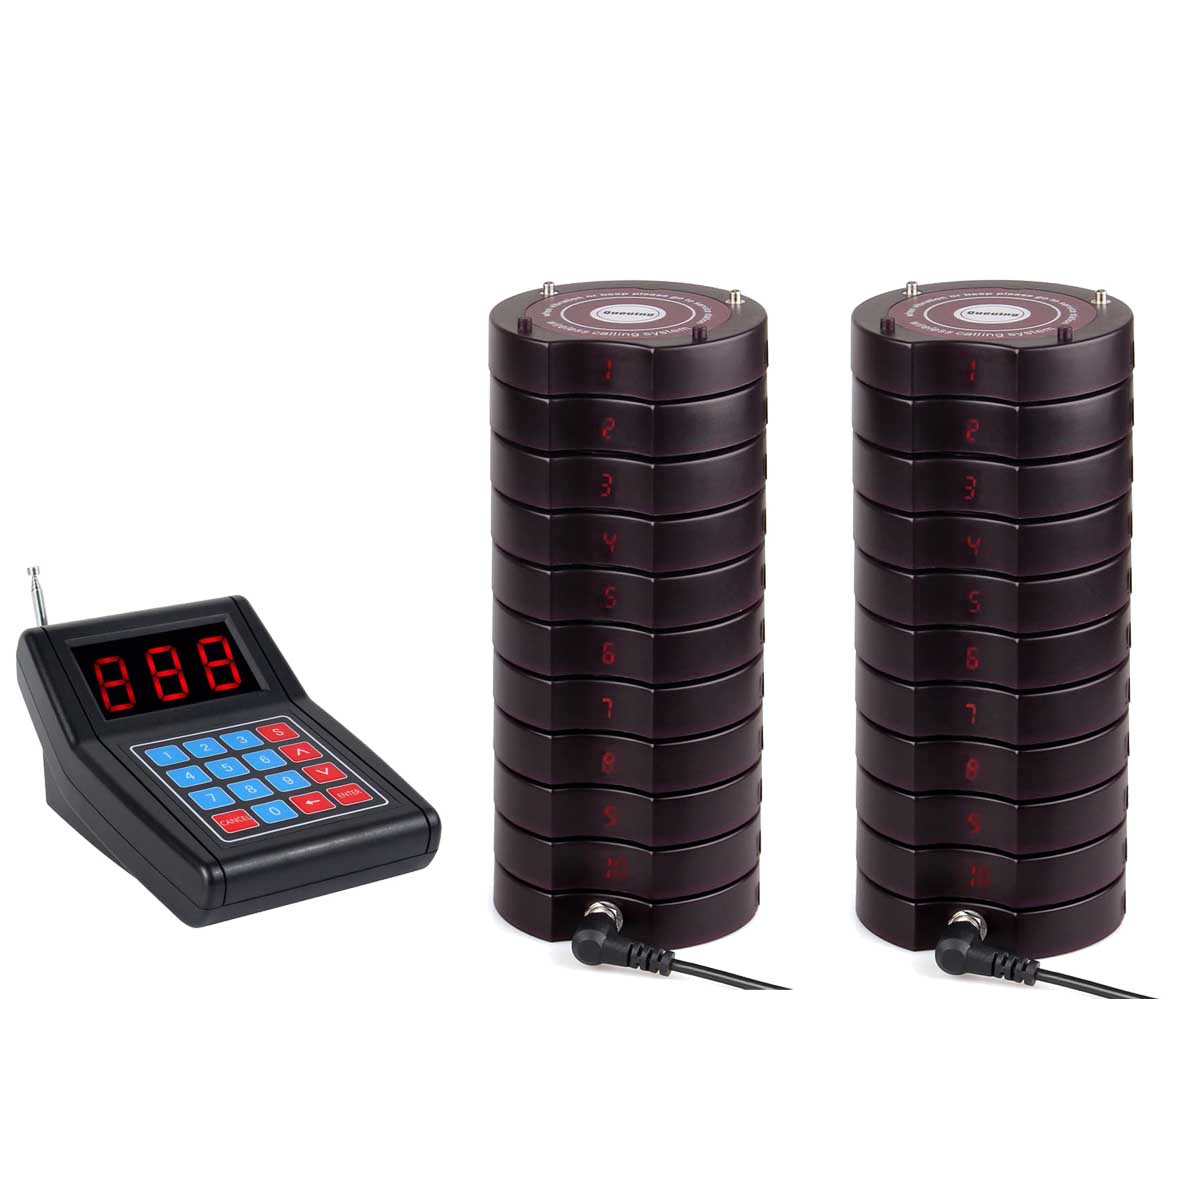 Restaurant Wireless Call Paging System1*Keypad Transmitter&18*Coaster Pagers UK 